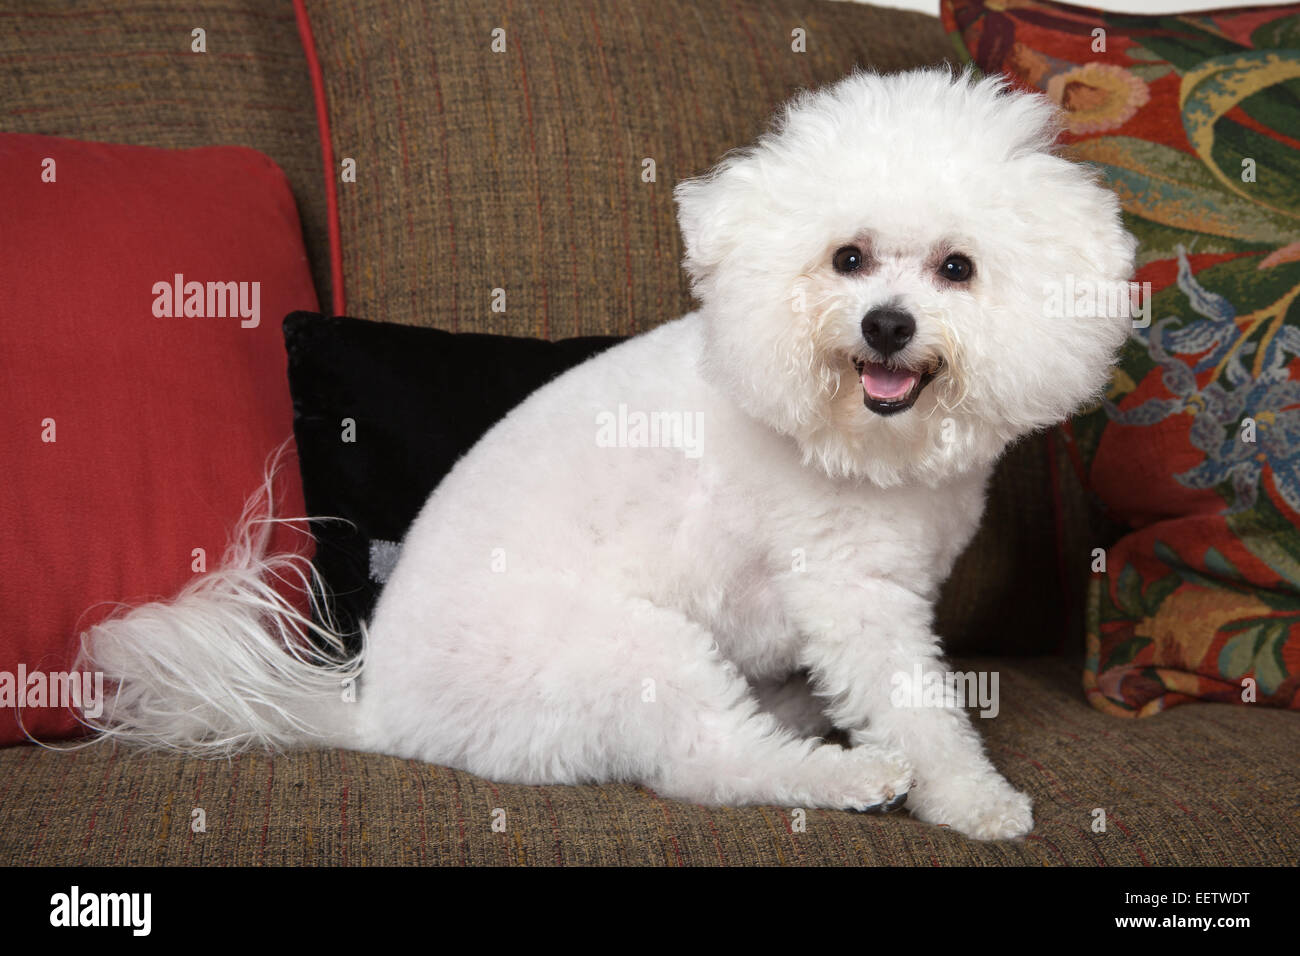 Pablo, a Bichon Frise dog sitting on the couch Stock Photo